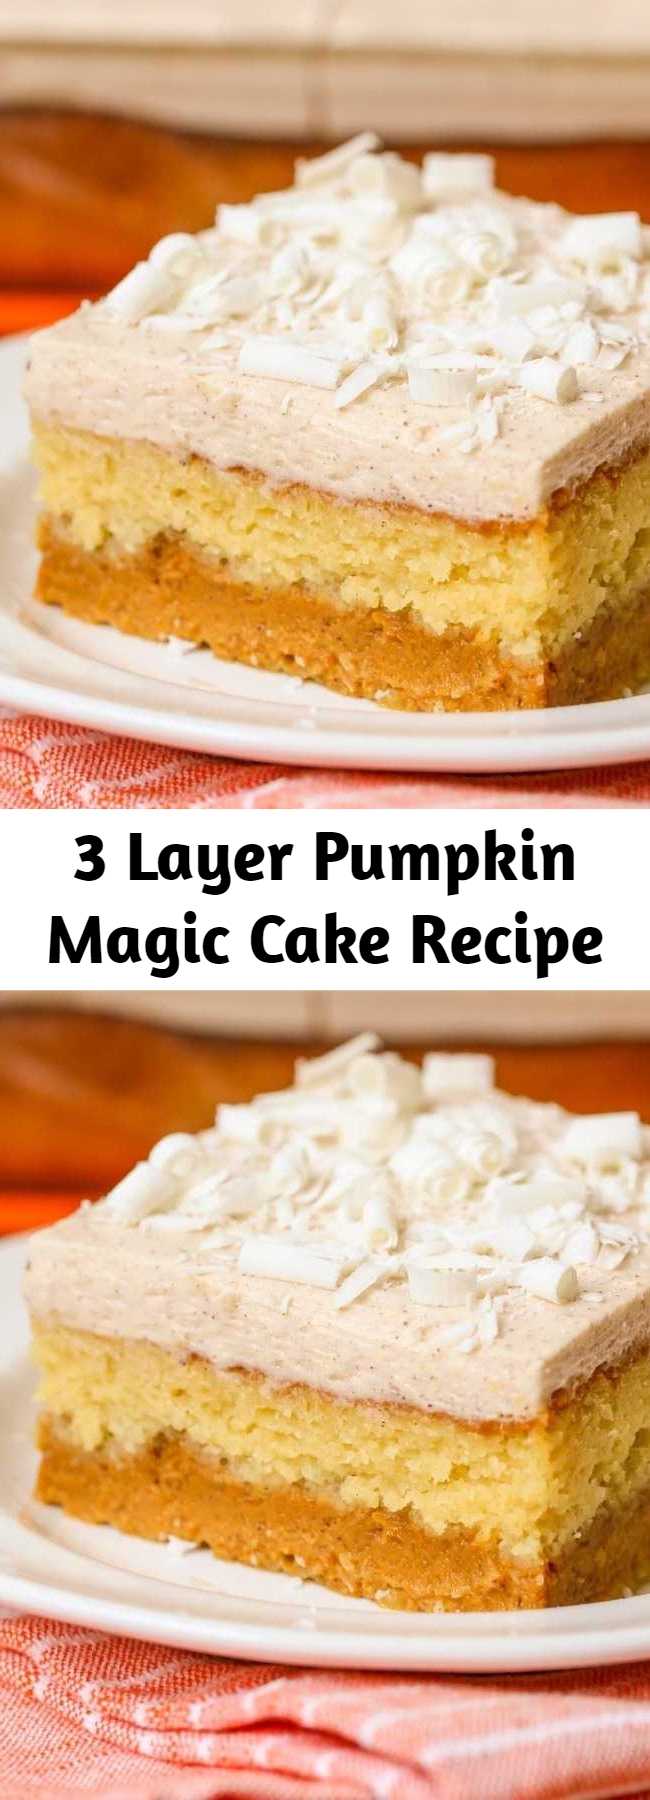 3 Layer Pumpkin Magic Cake Recipe - See For Yourself Why This 3 Layer Magic Pumpkin Cake Is So Magical! It’s Made Up Of A Creamy Pumpkin Puree Layer, A Layer Of Yellow Cake, And Lastly A White Chocolate Pumpkin Spice Frosting Topped With White Chocolate Shavings!!